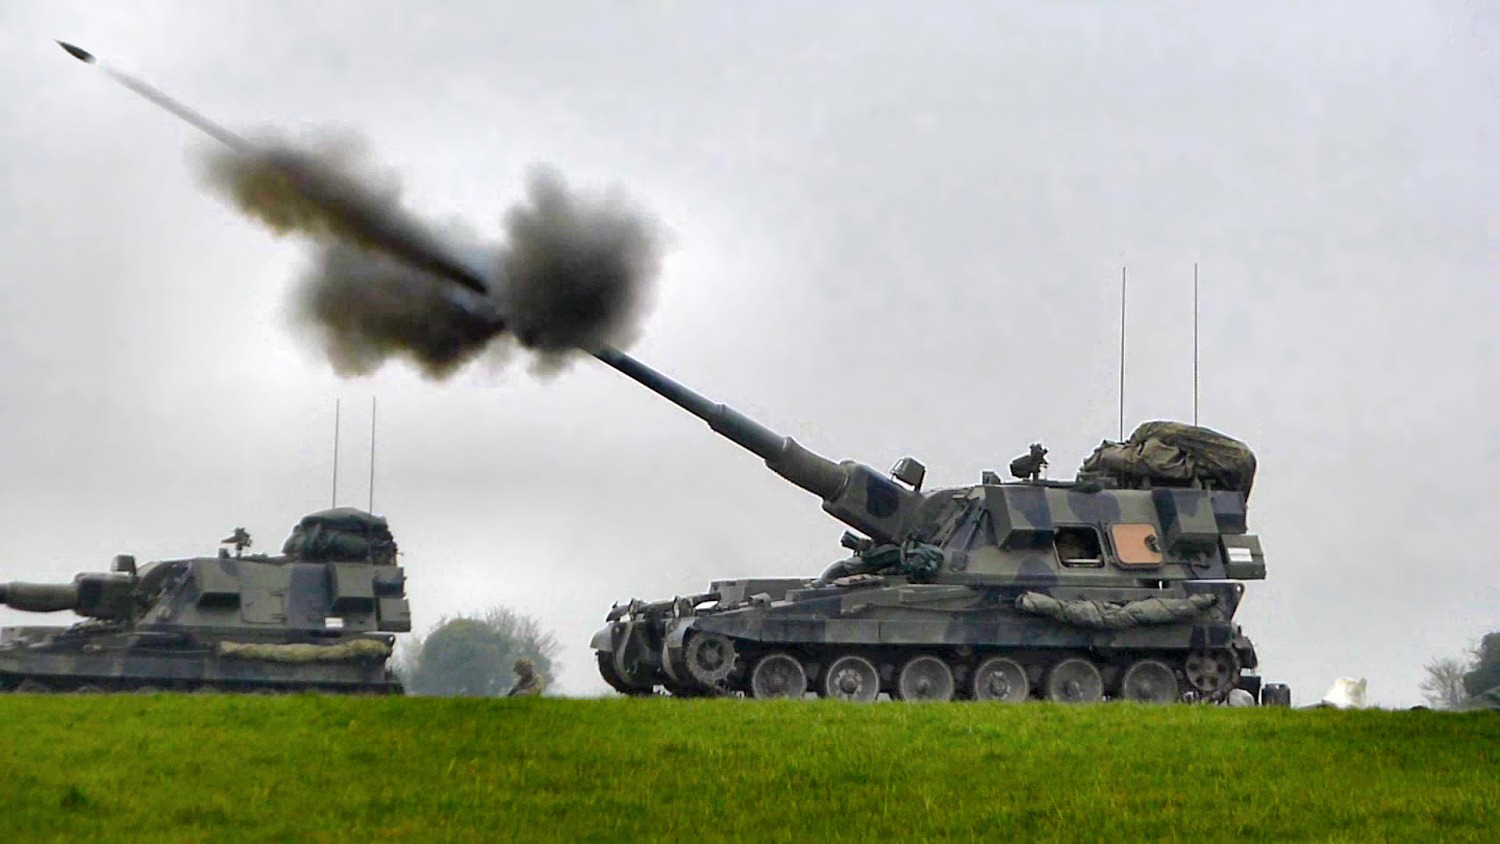 //AS90 / Archivbild / British Army's Braveheart 155mm Self-Propelled Howitzer firing by Sarah Ward Aviatrix is licensed under CC BY 2.0. https://creativecommons.org/licenses/by/2.0/